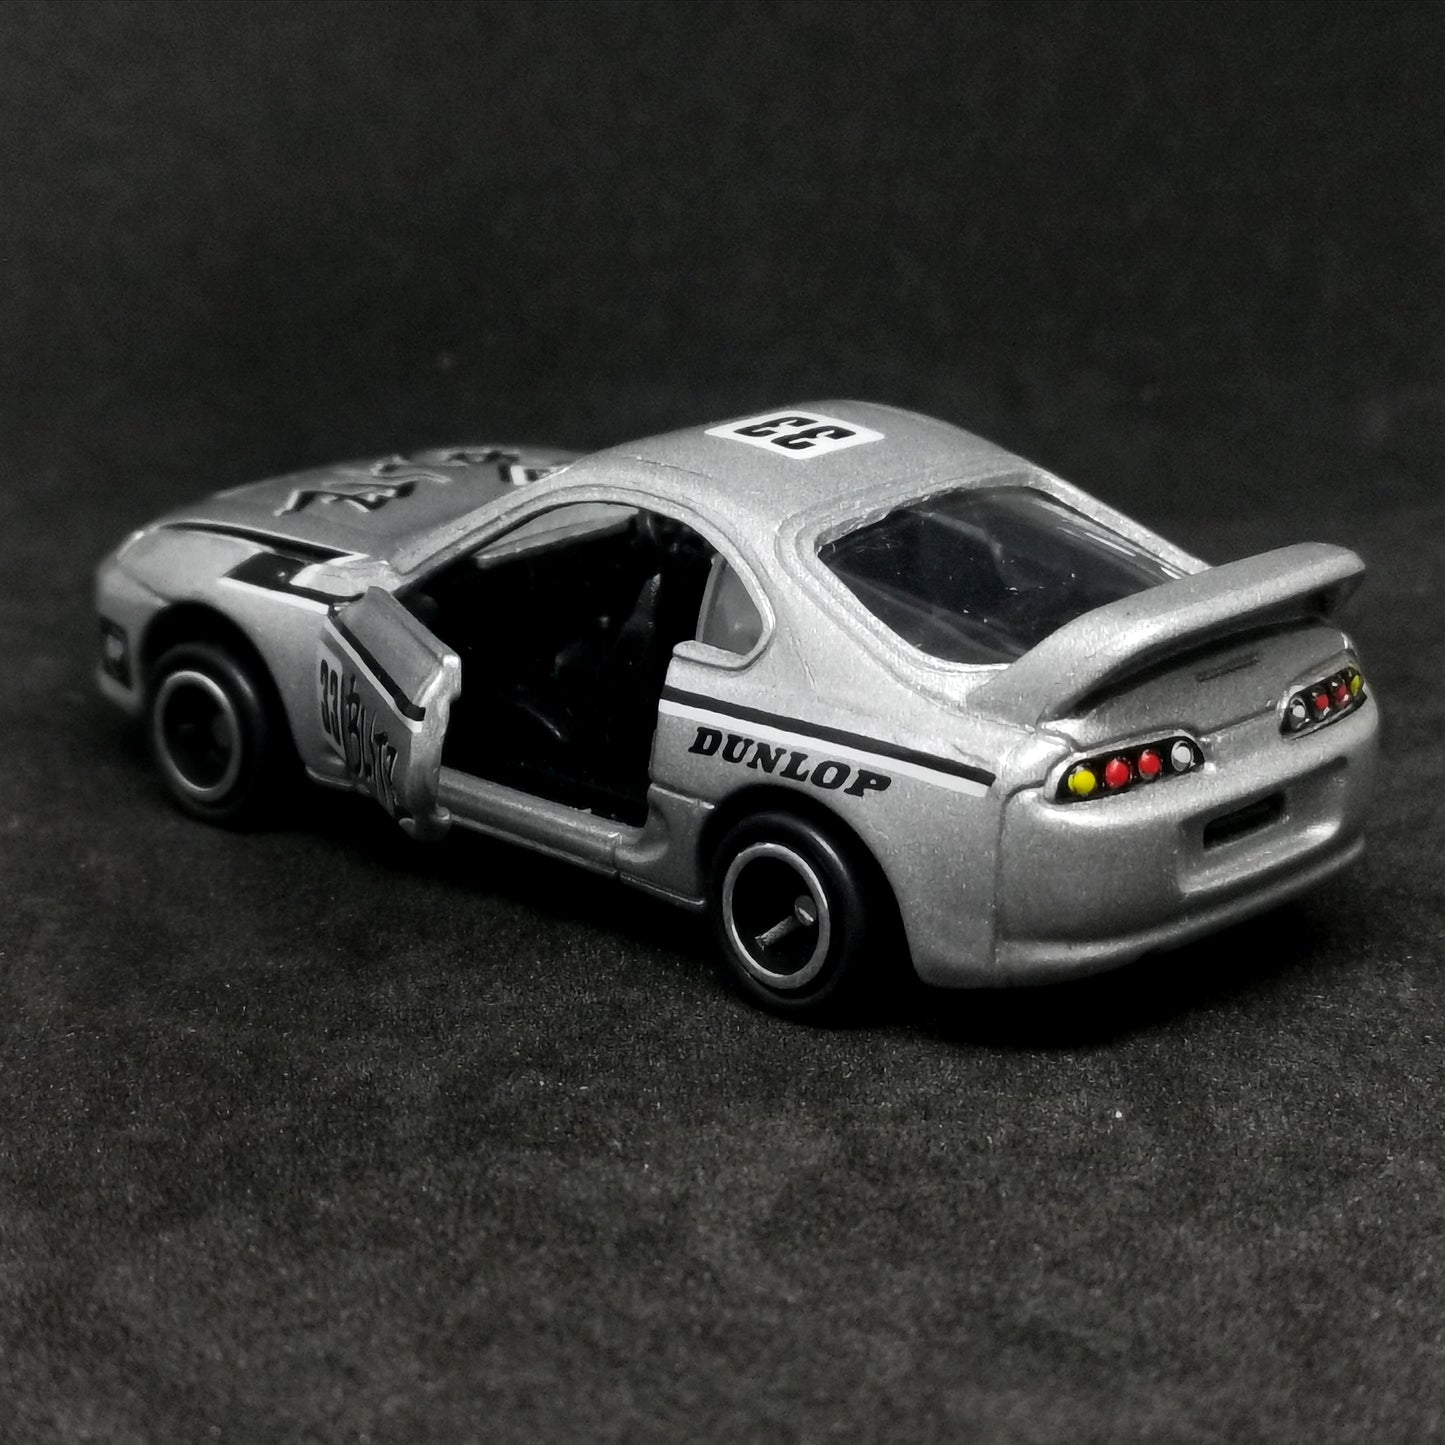 Tomica Gift Set 25th Anniversary Gift Set Toyota Supra ( separate from the Gift Set)